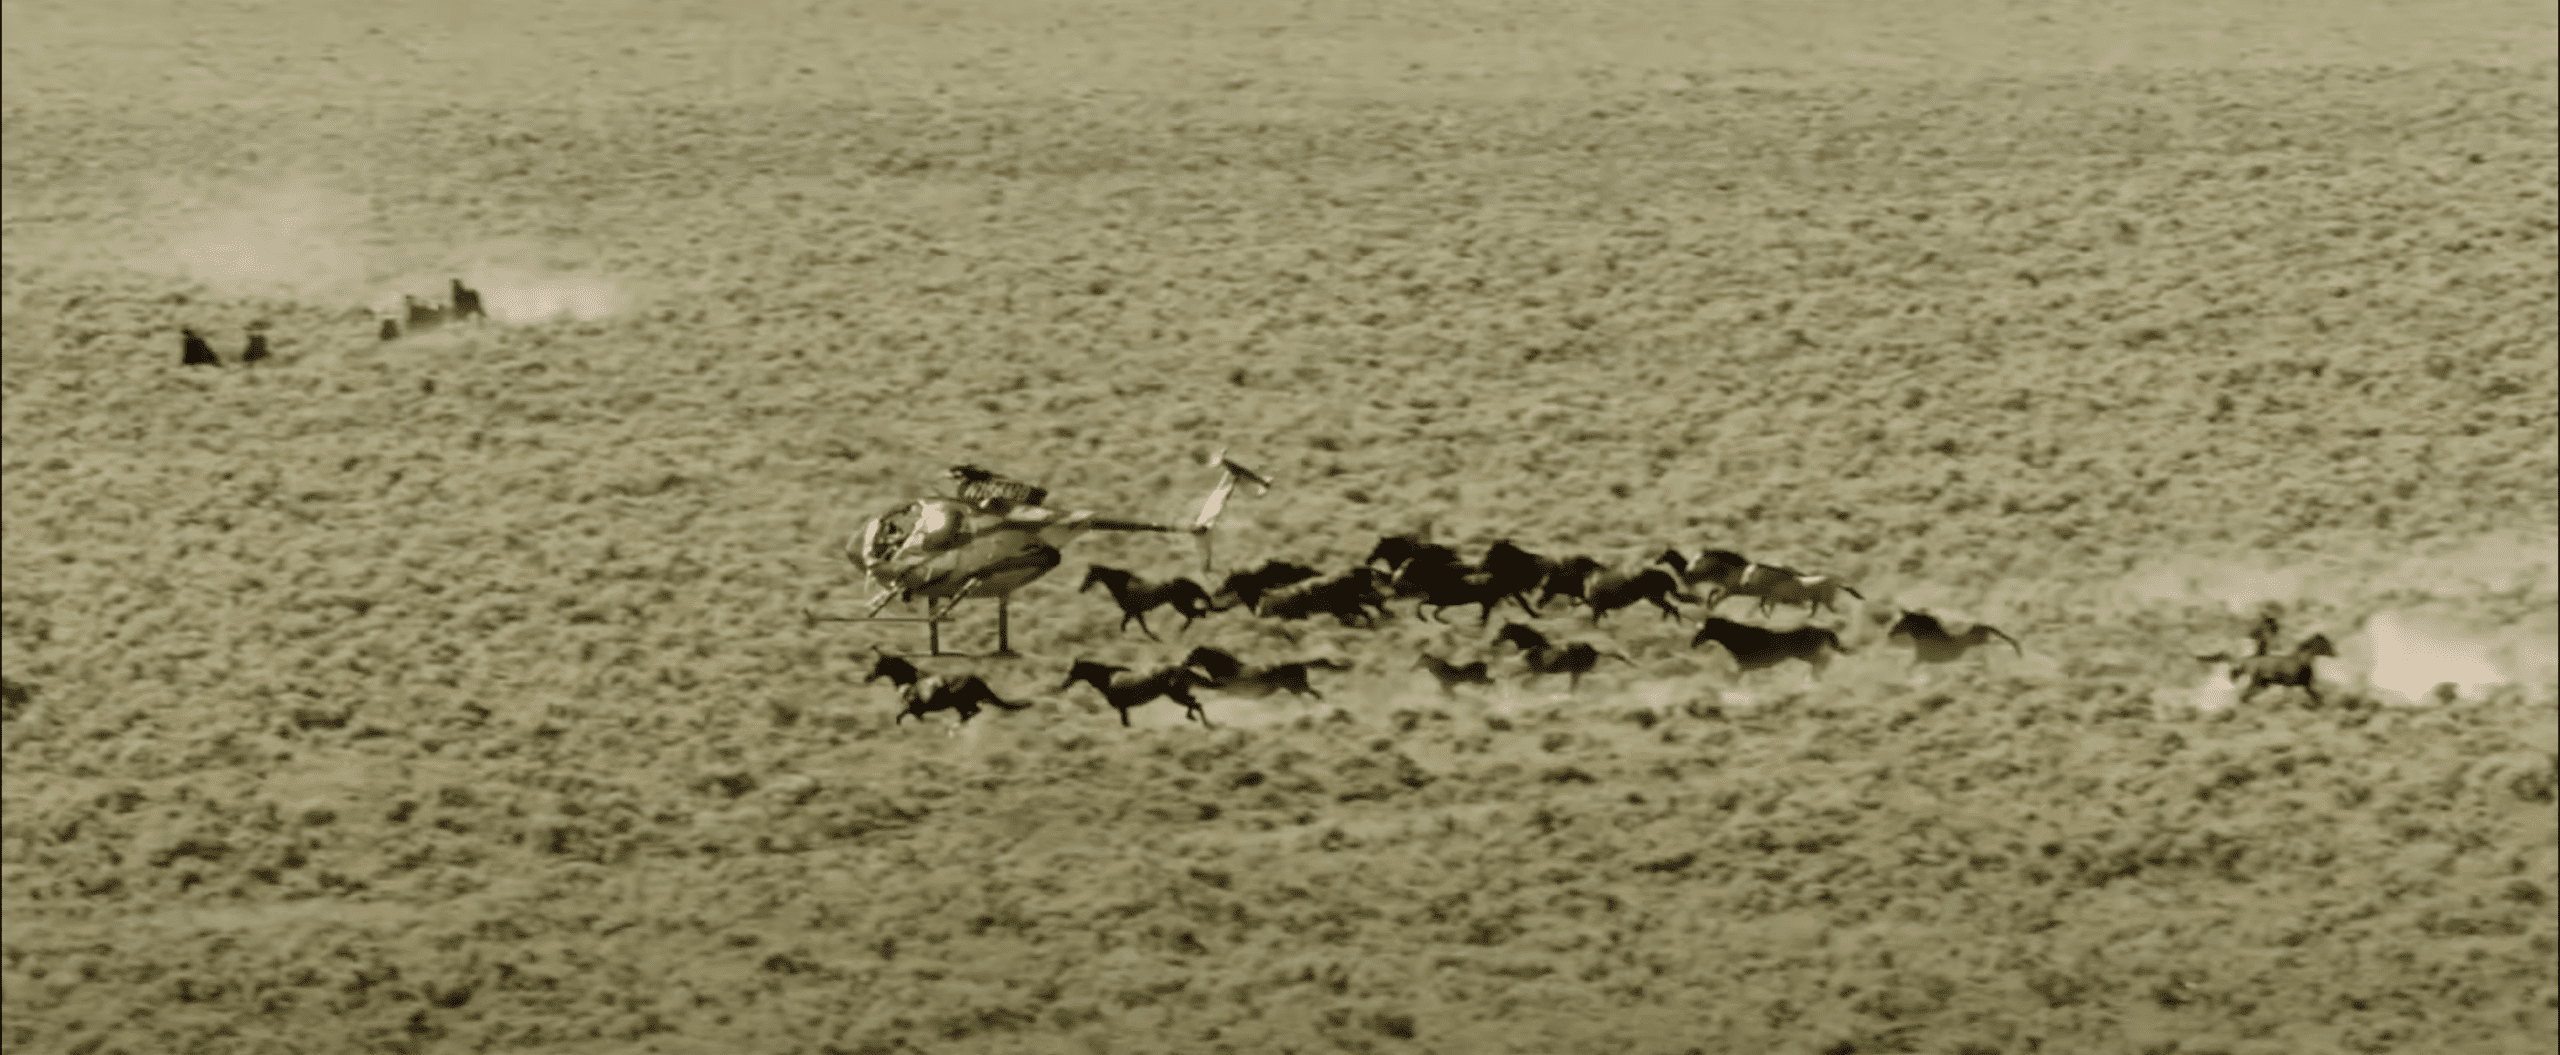 A helicopter descends on a herd of fearful wild horses as they try to escape. 